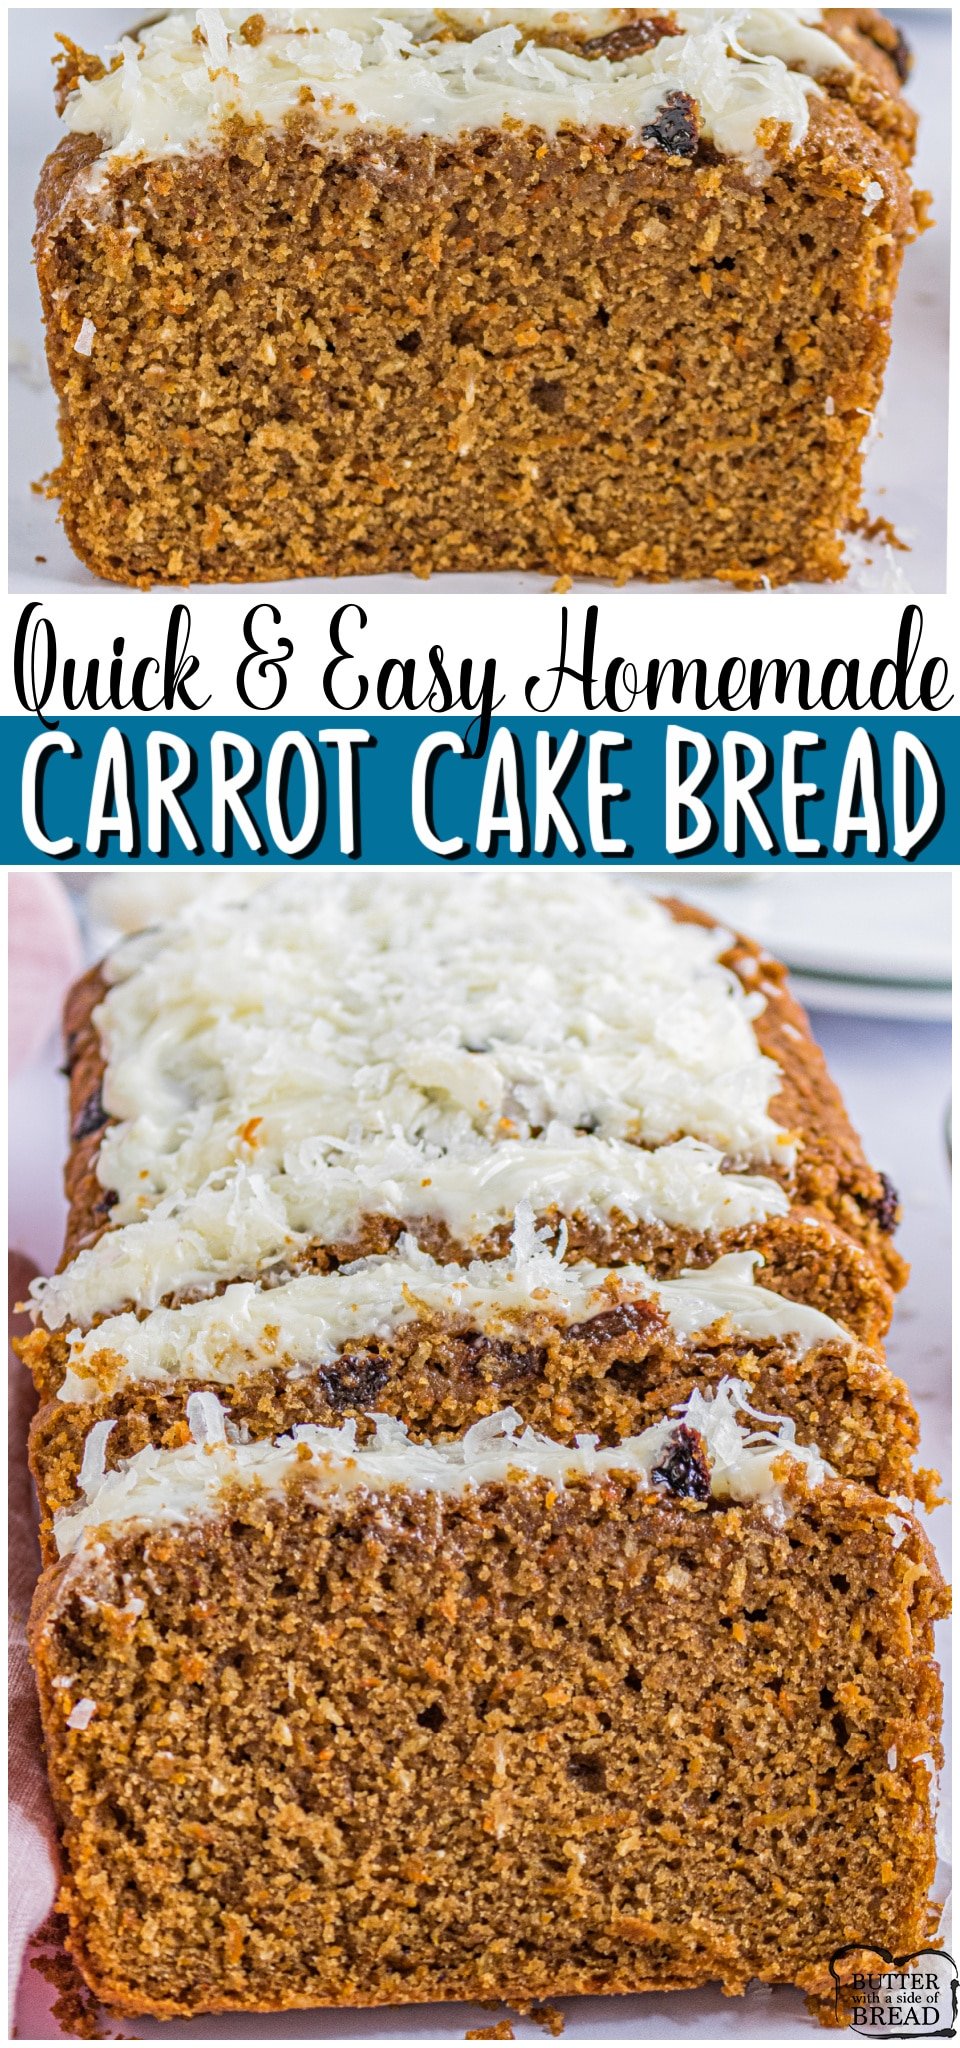 Carrot cake bread is everything you love about Carrot Cake in bread form! Spiced sweet bread with coconut & raisins, topped with a lovely cream cheese frosting.